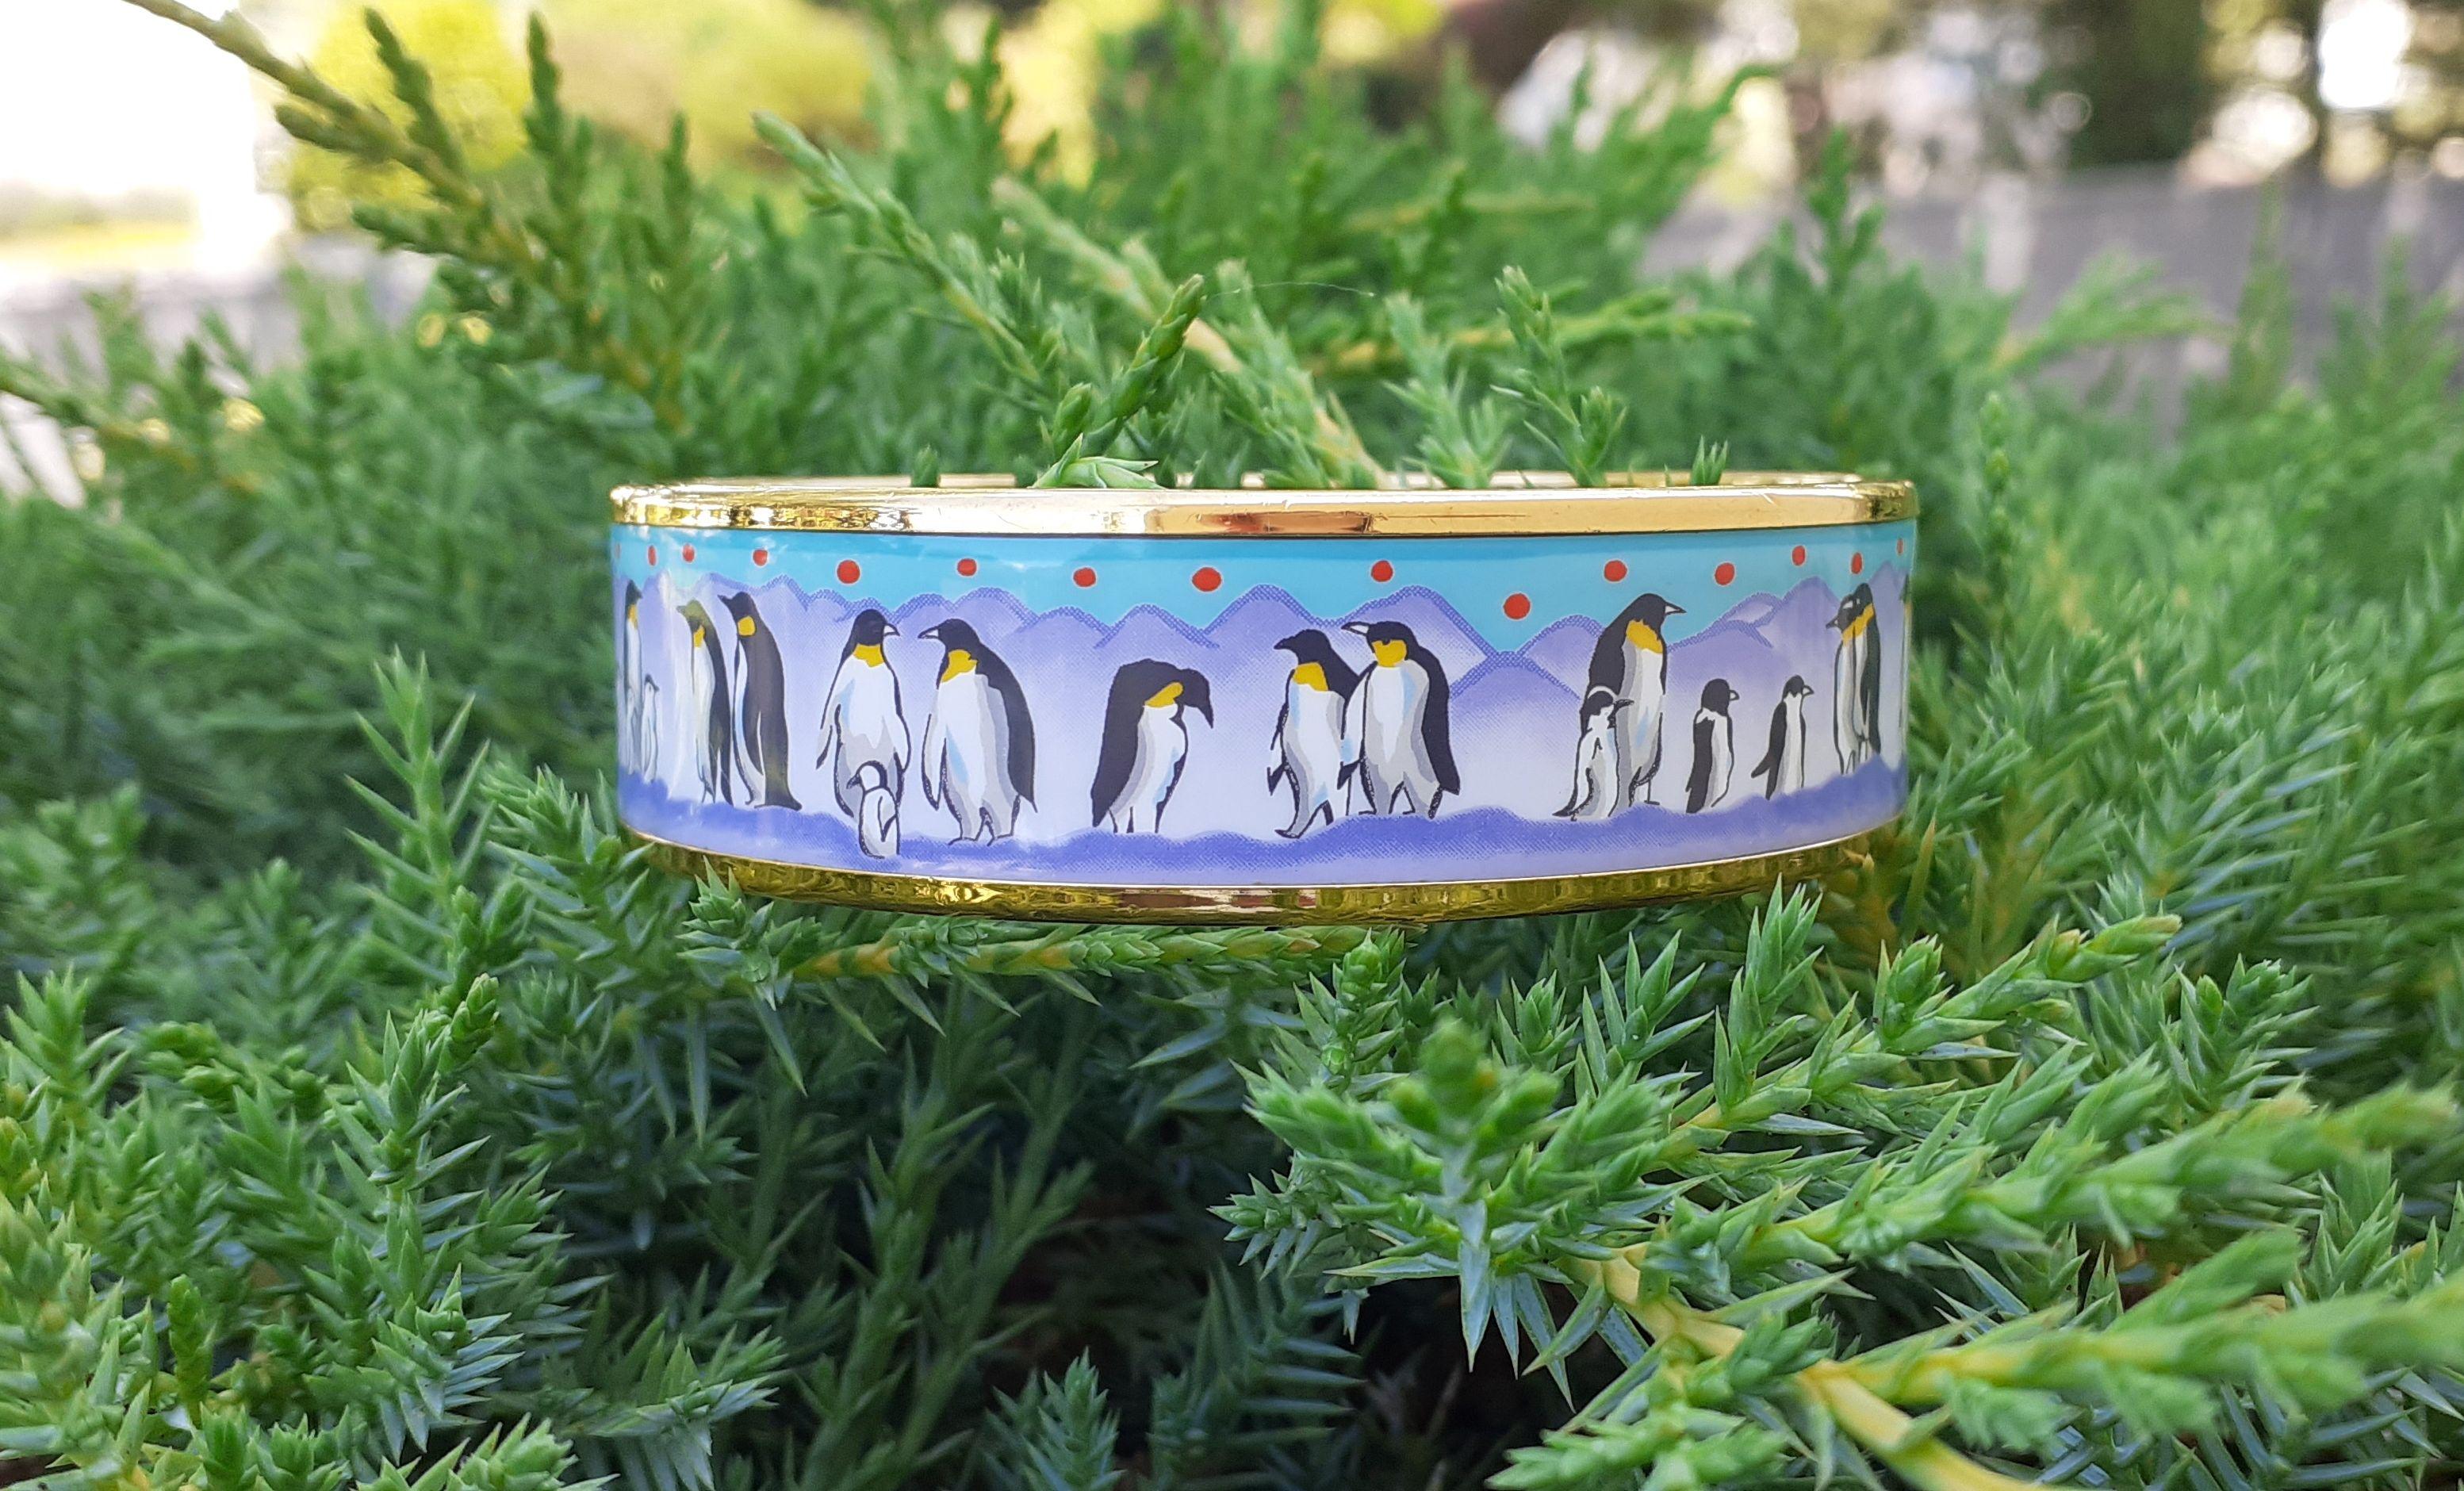 Super Cute Authentic Hermès Bracelet

Print: Penguins on ice

RARE bracelet, hard to find !

Made in Austria + E

Made of printed enamel and yellow gold plated hardware

Colorways: Purple and Turquoise Blue Background / Red Polka Dots / Black White